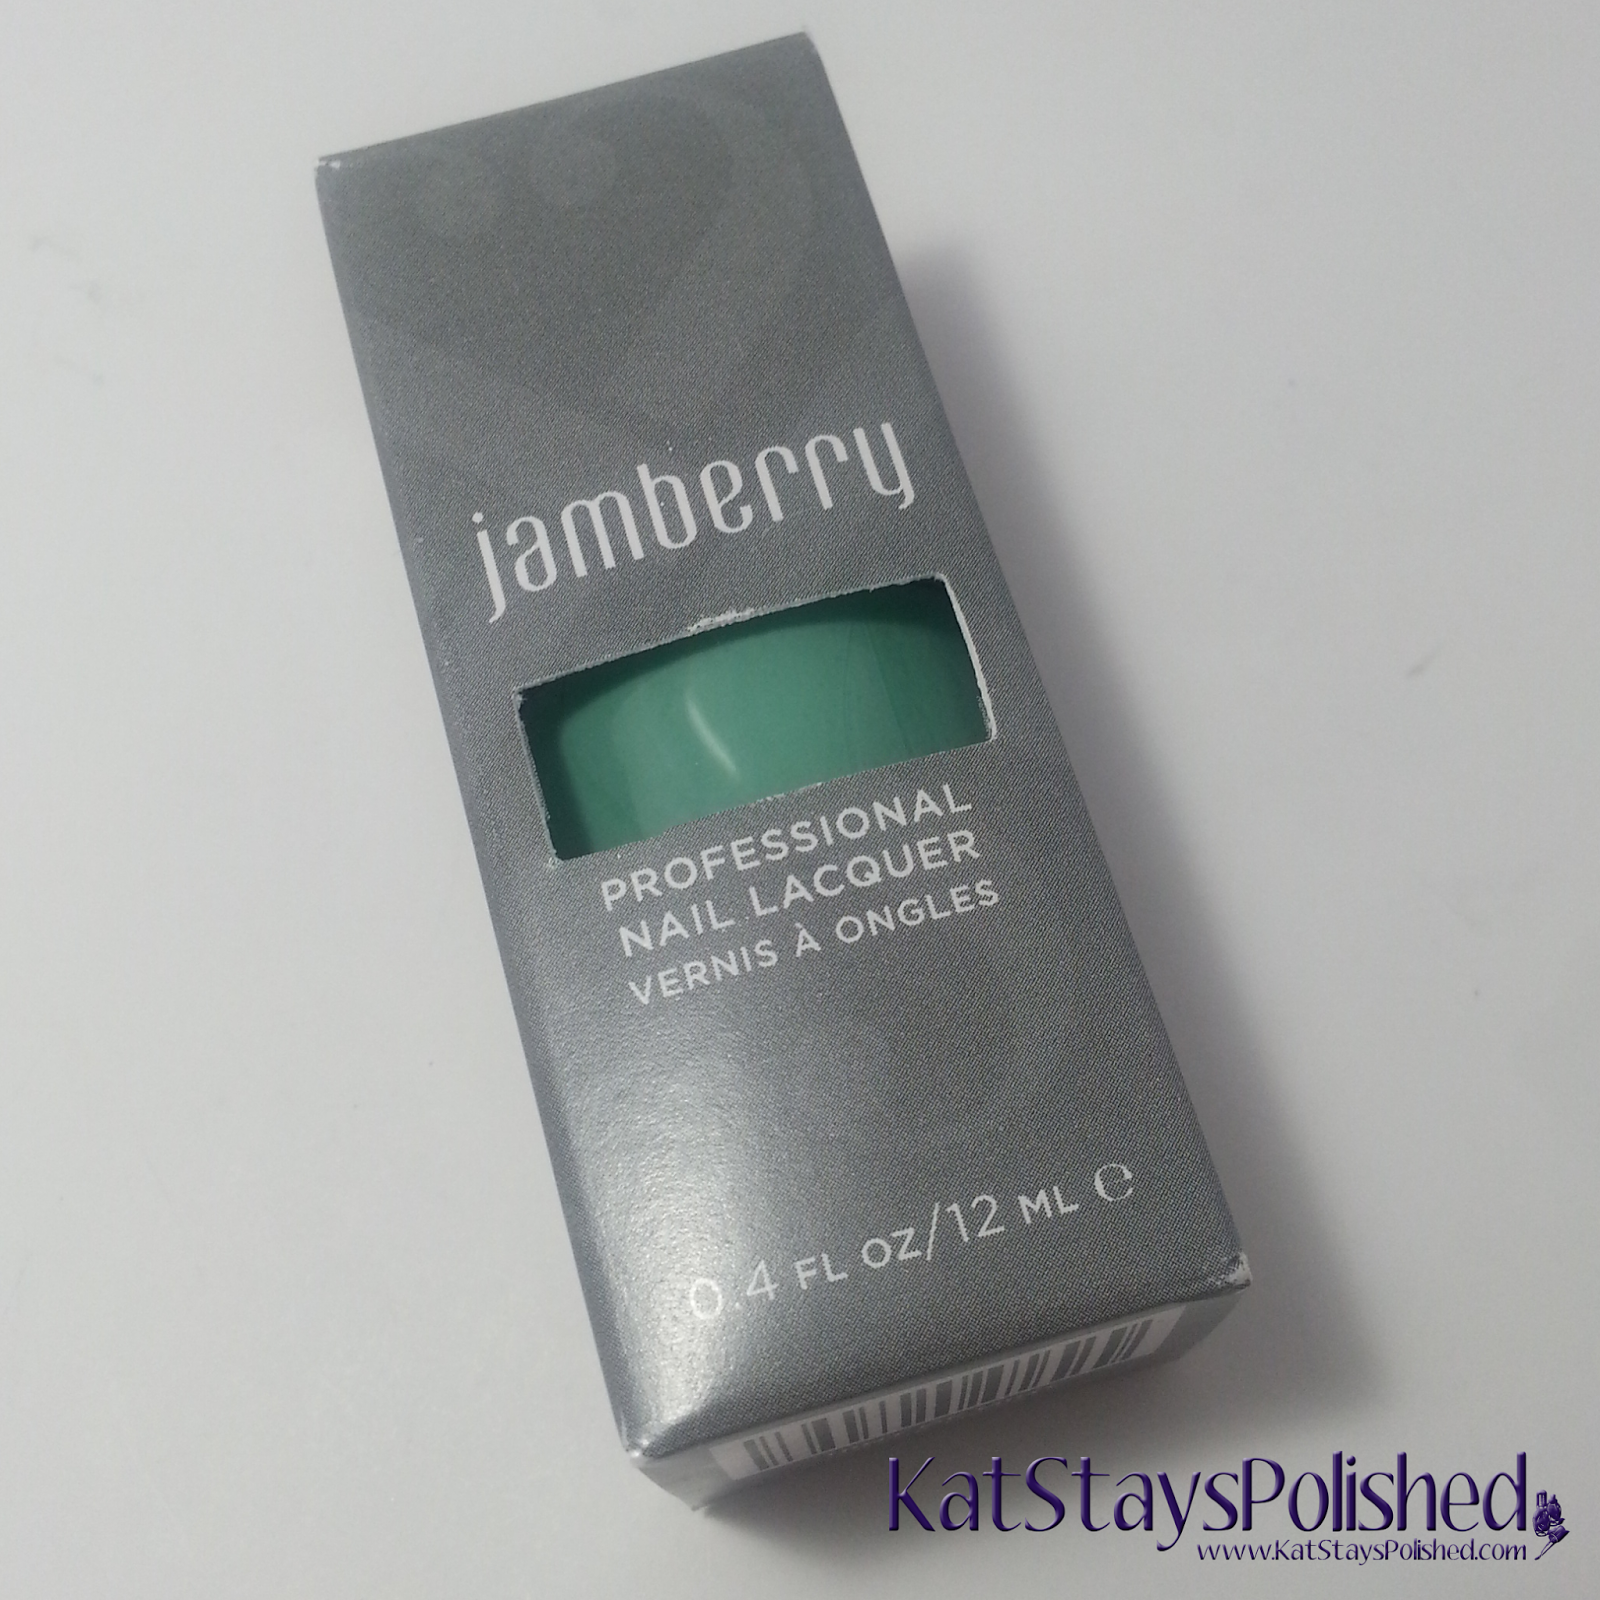 Jamberry Nail Lacquer - Hint of Mint | Kat Stays Polished